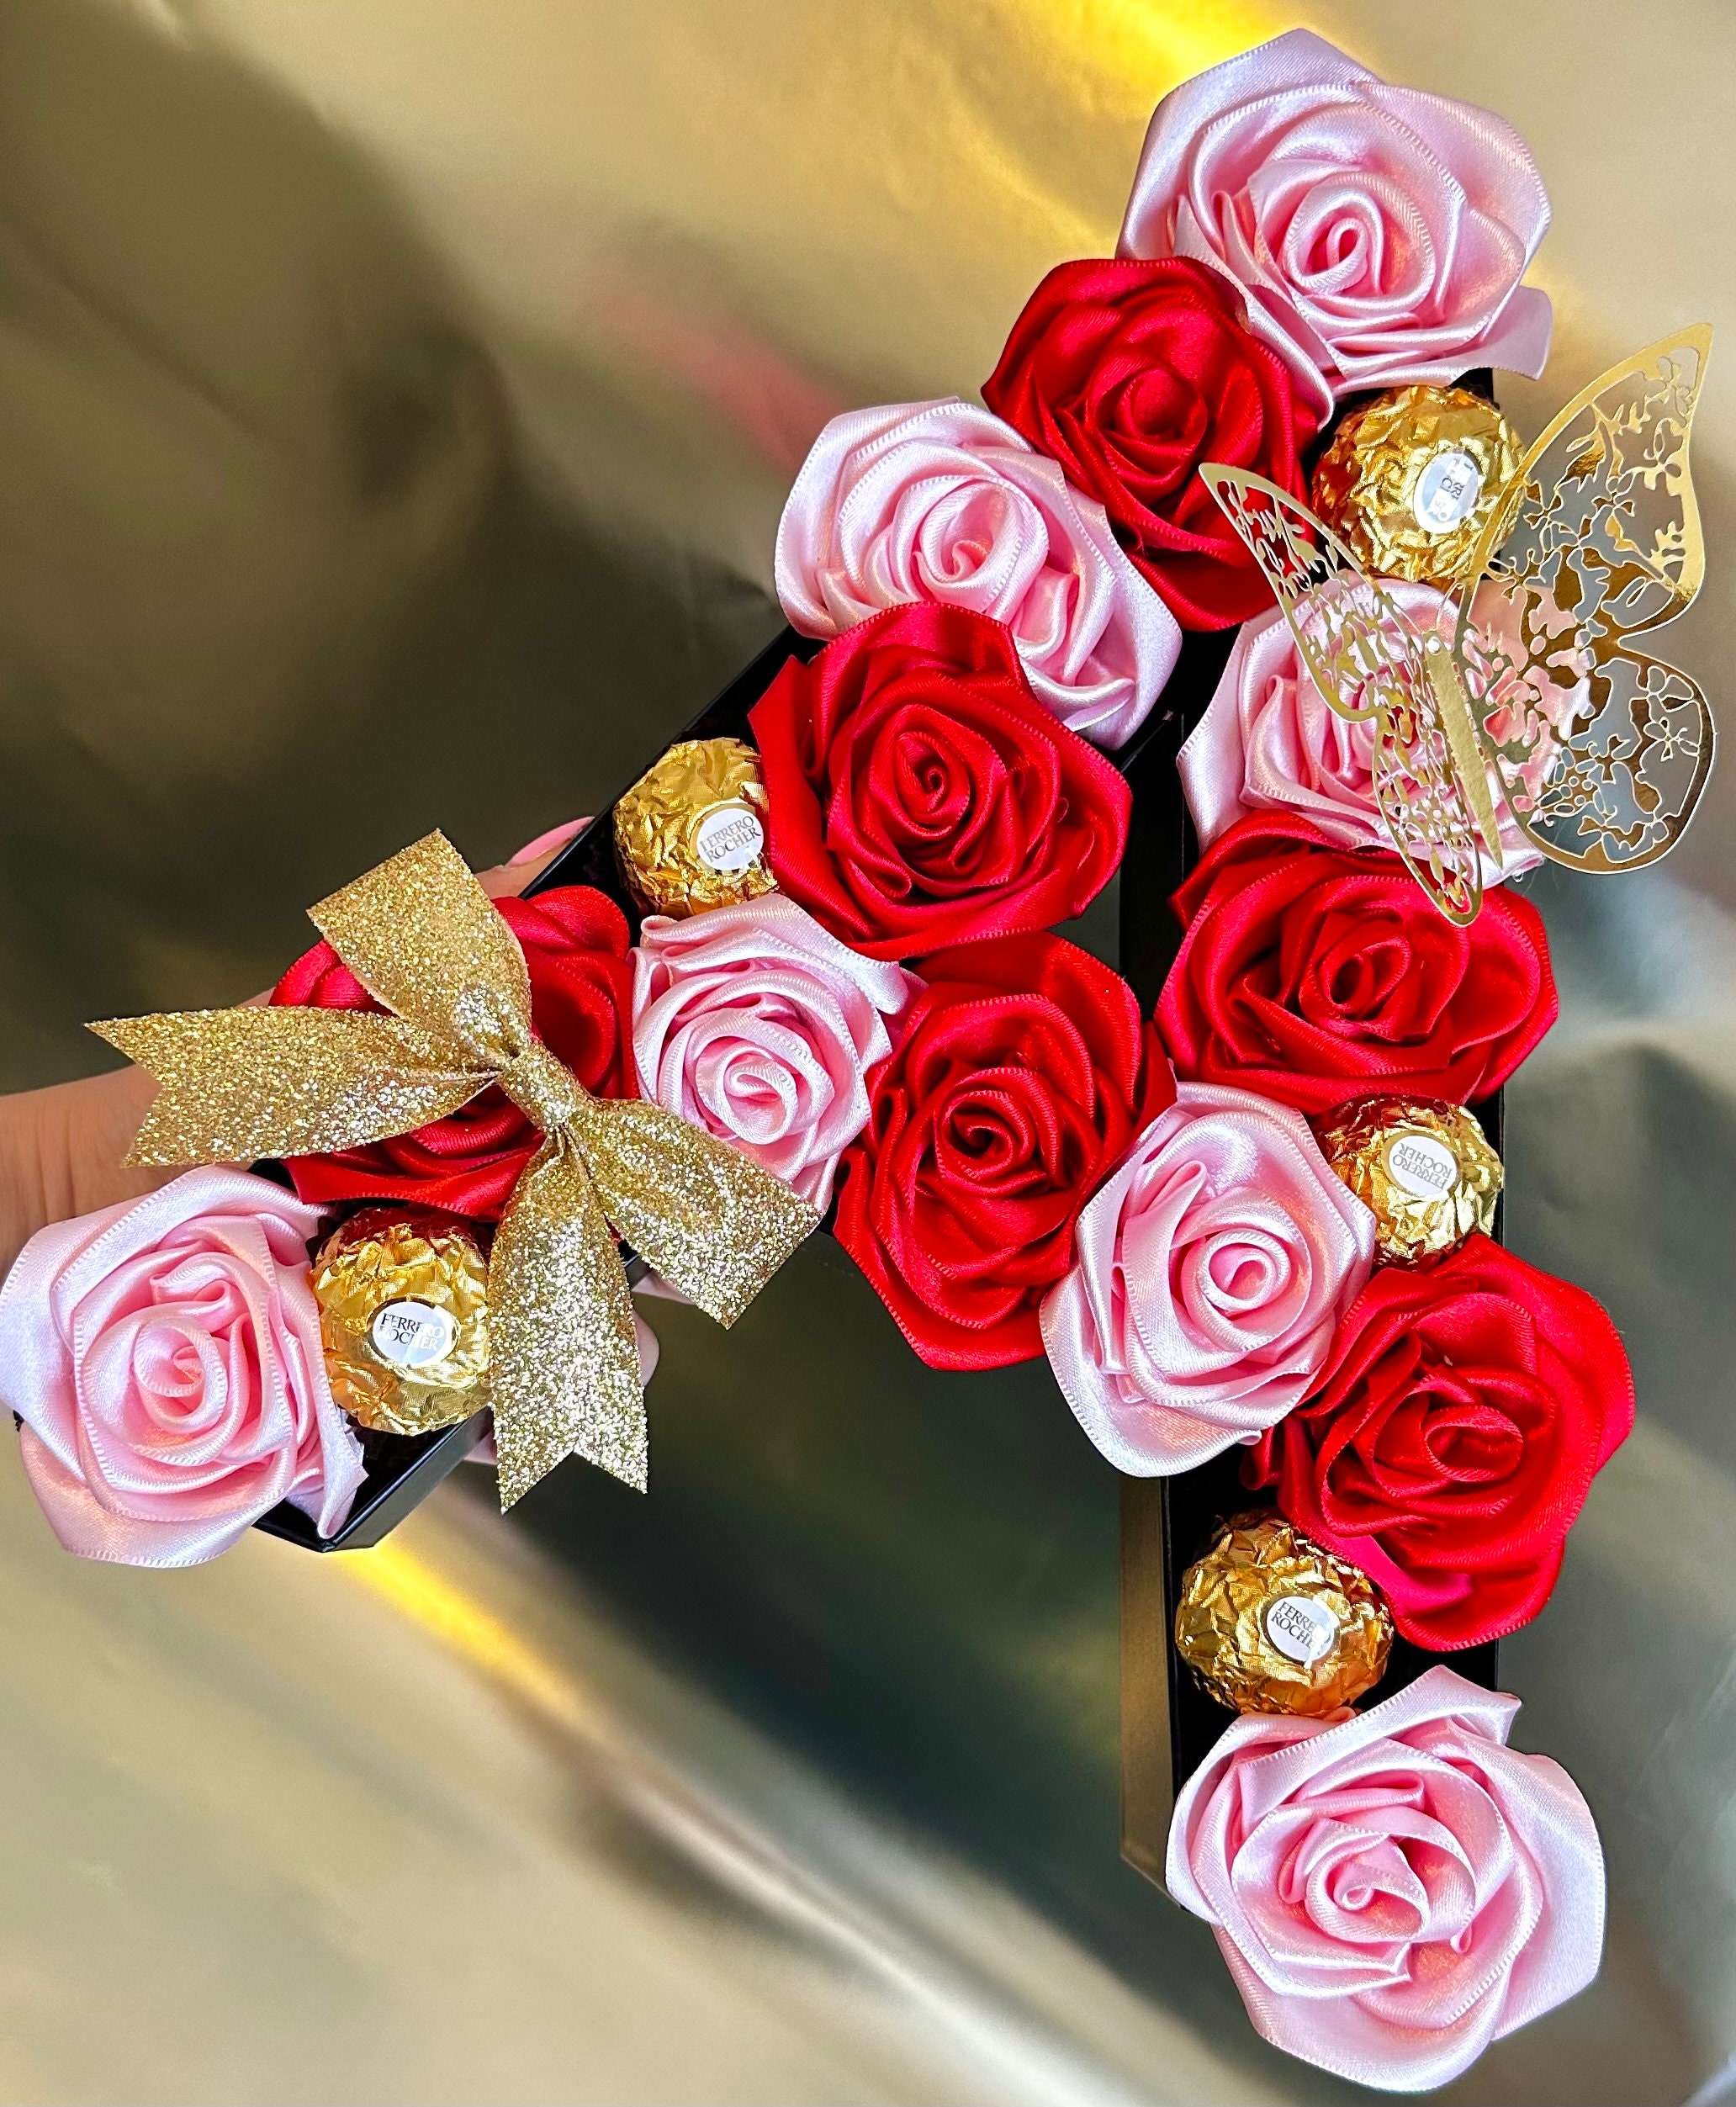 Silk Ribbon Roses. Flower Box. Satin Roses. Eternity Rose. Bouquets Roses.  Home Dekor. Rose Box Bouquet. Wedding Gifts. Birthday Gifts 